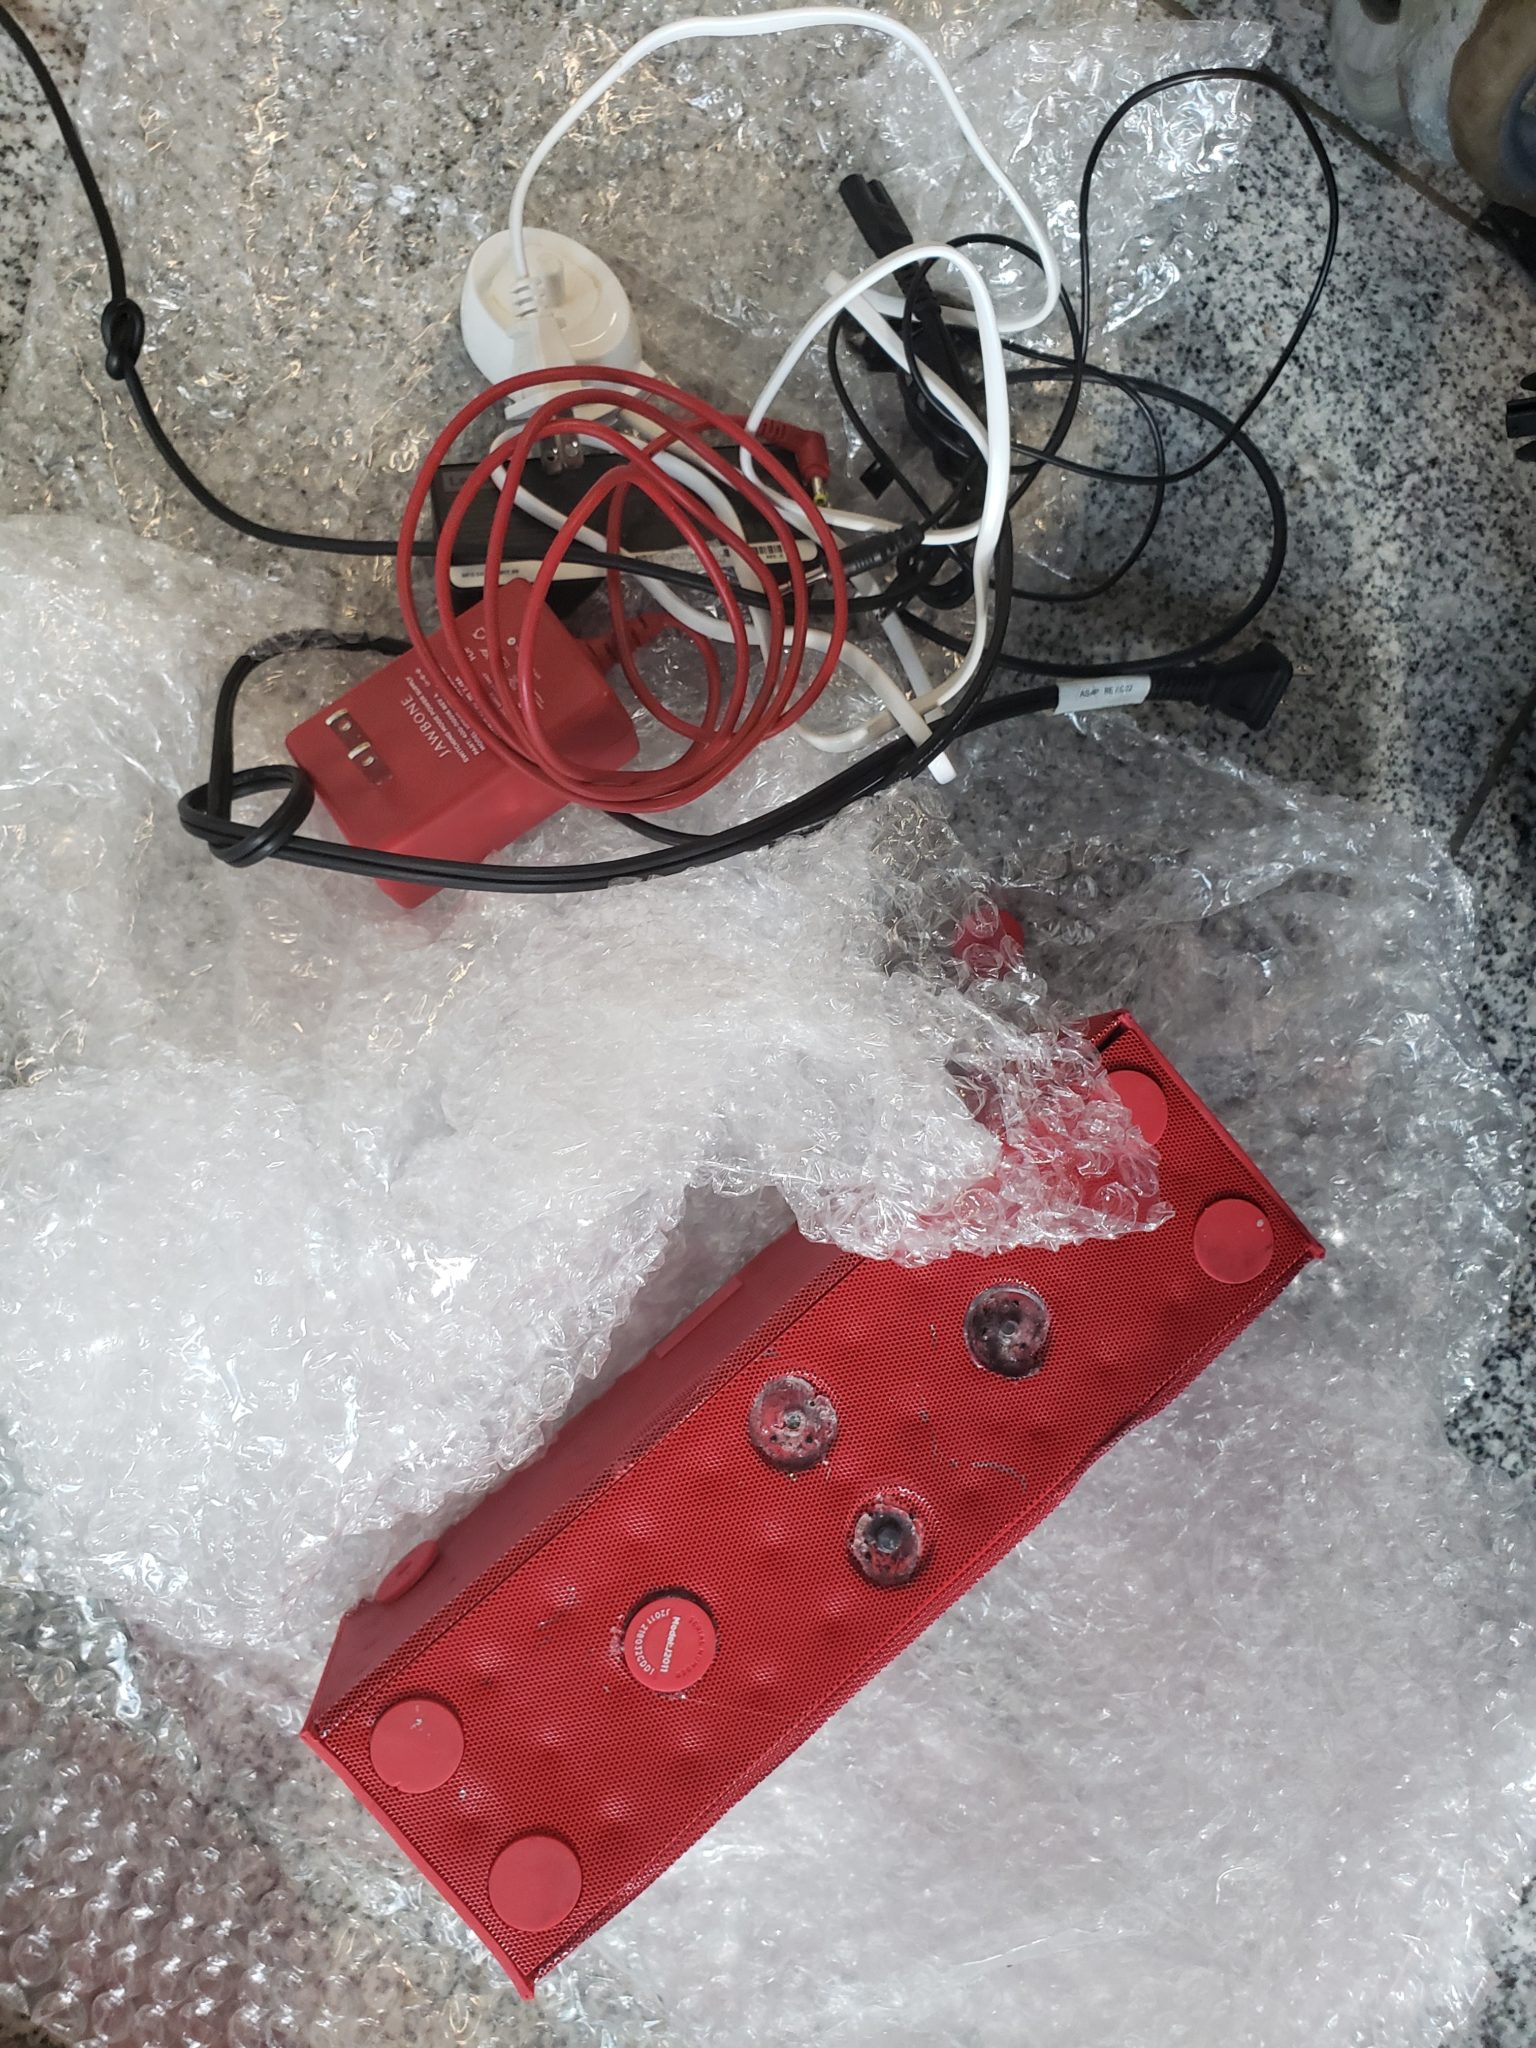 a red box with wires and wires on a surface